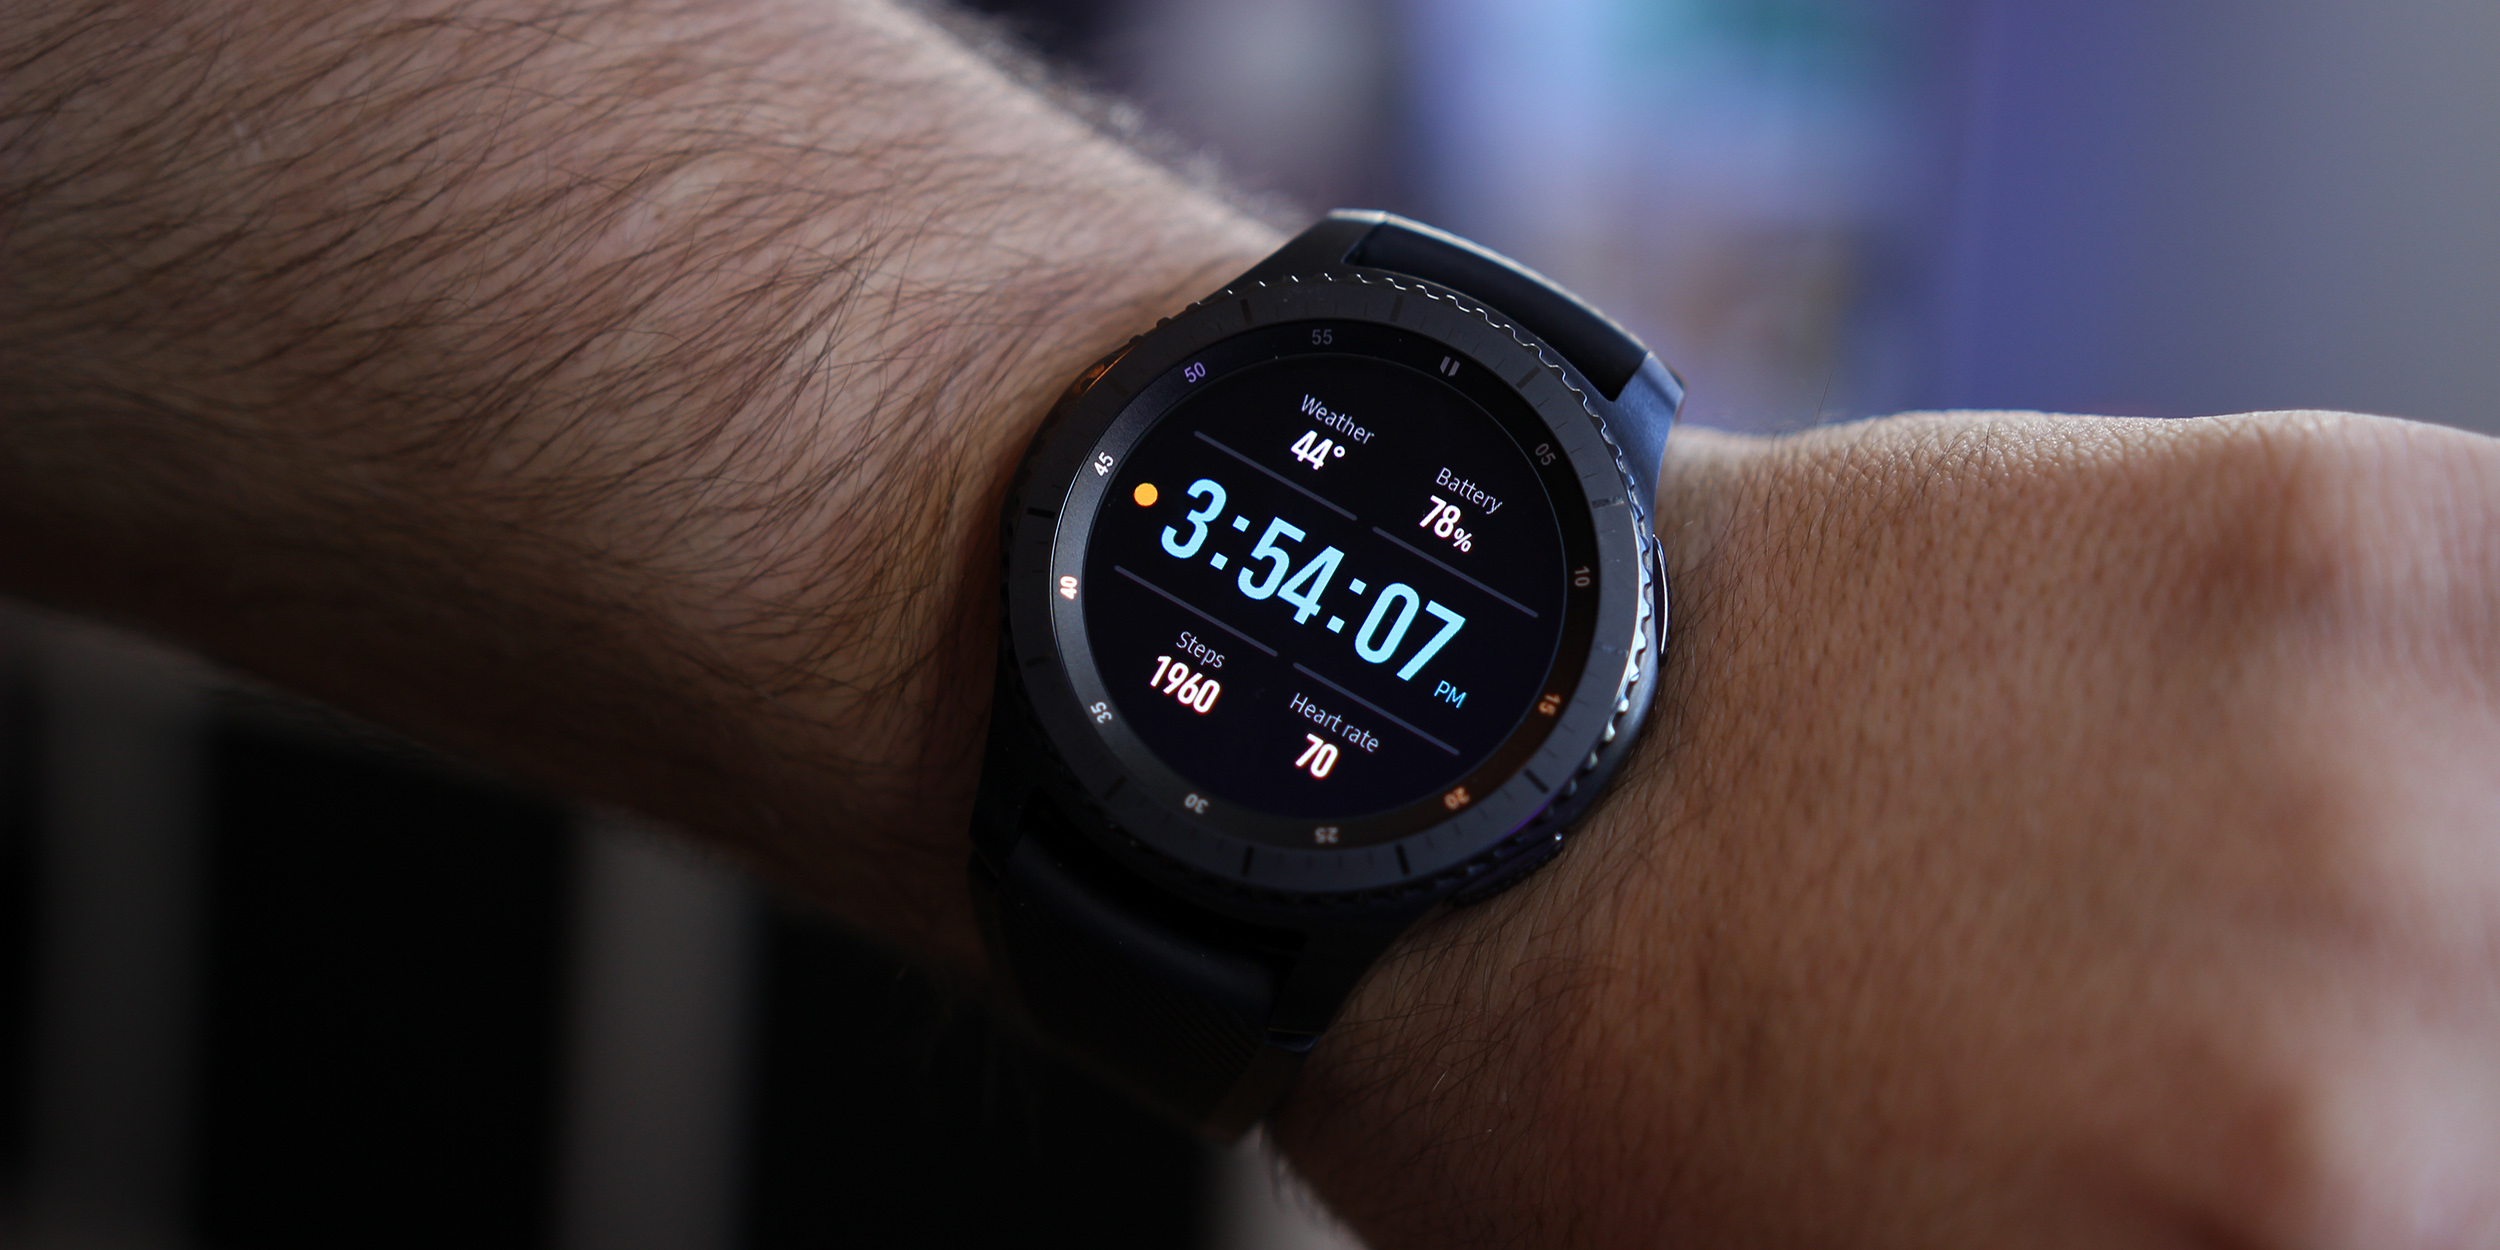 Samsung Gear S3 Review: This is the smartwatch of the future we've been waiting for... [Video]